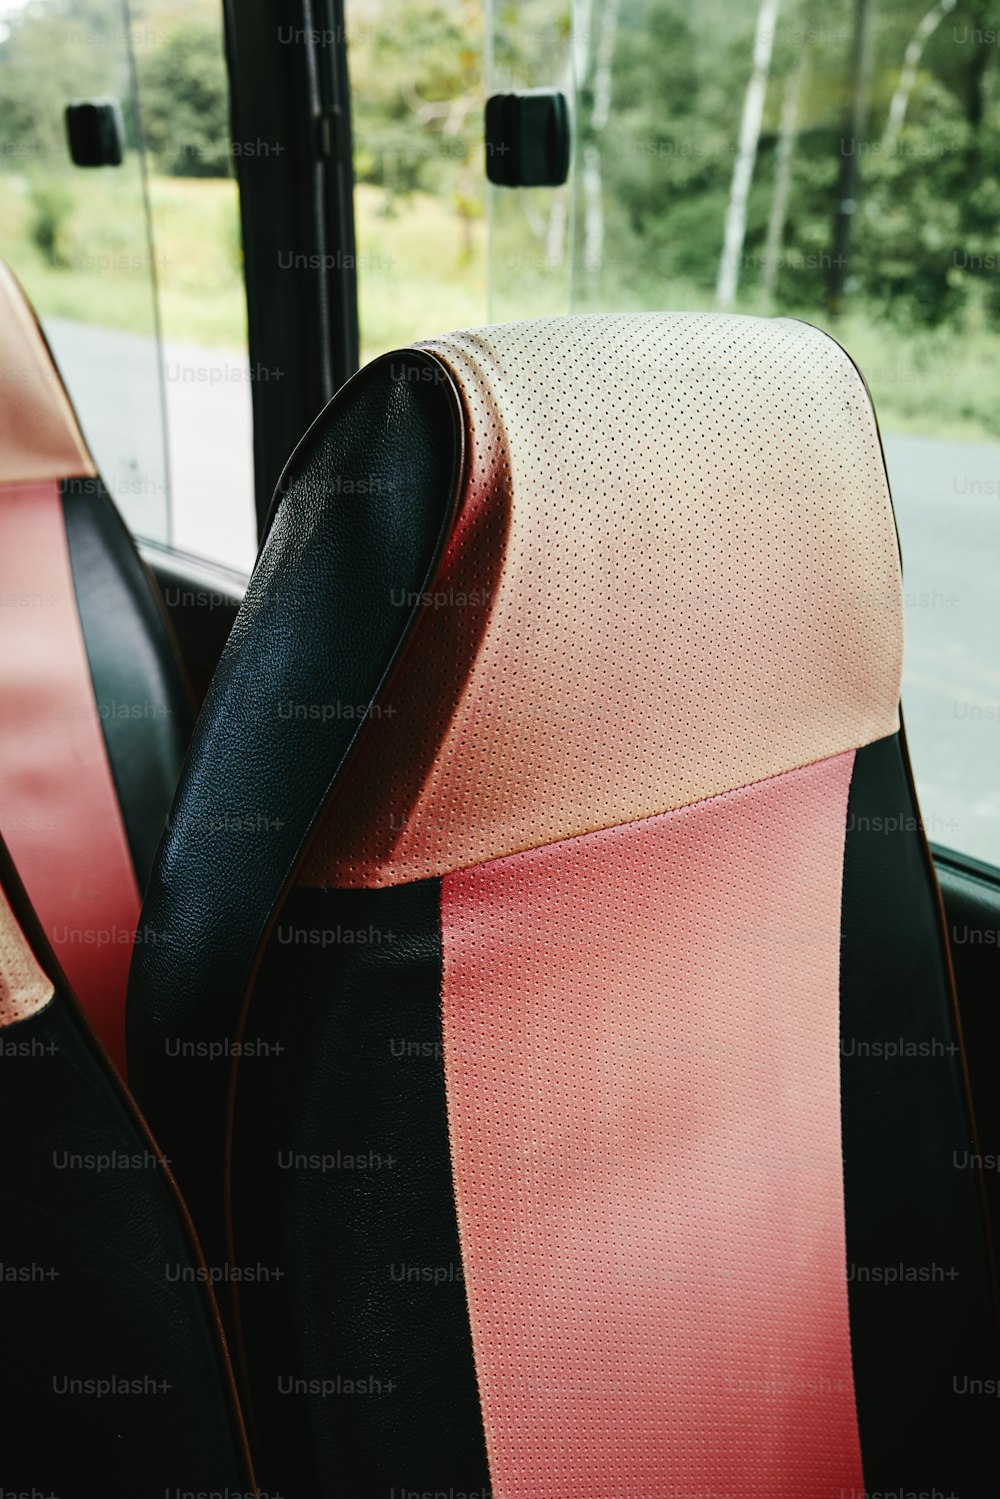 the seats in the bus are red and black